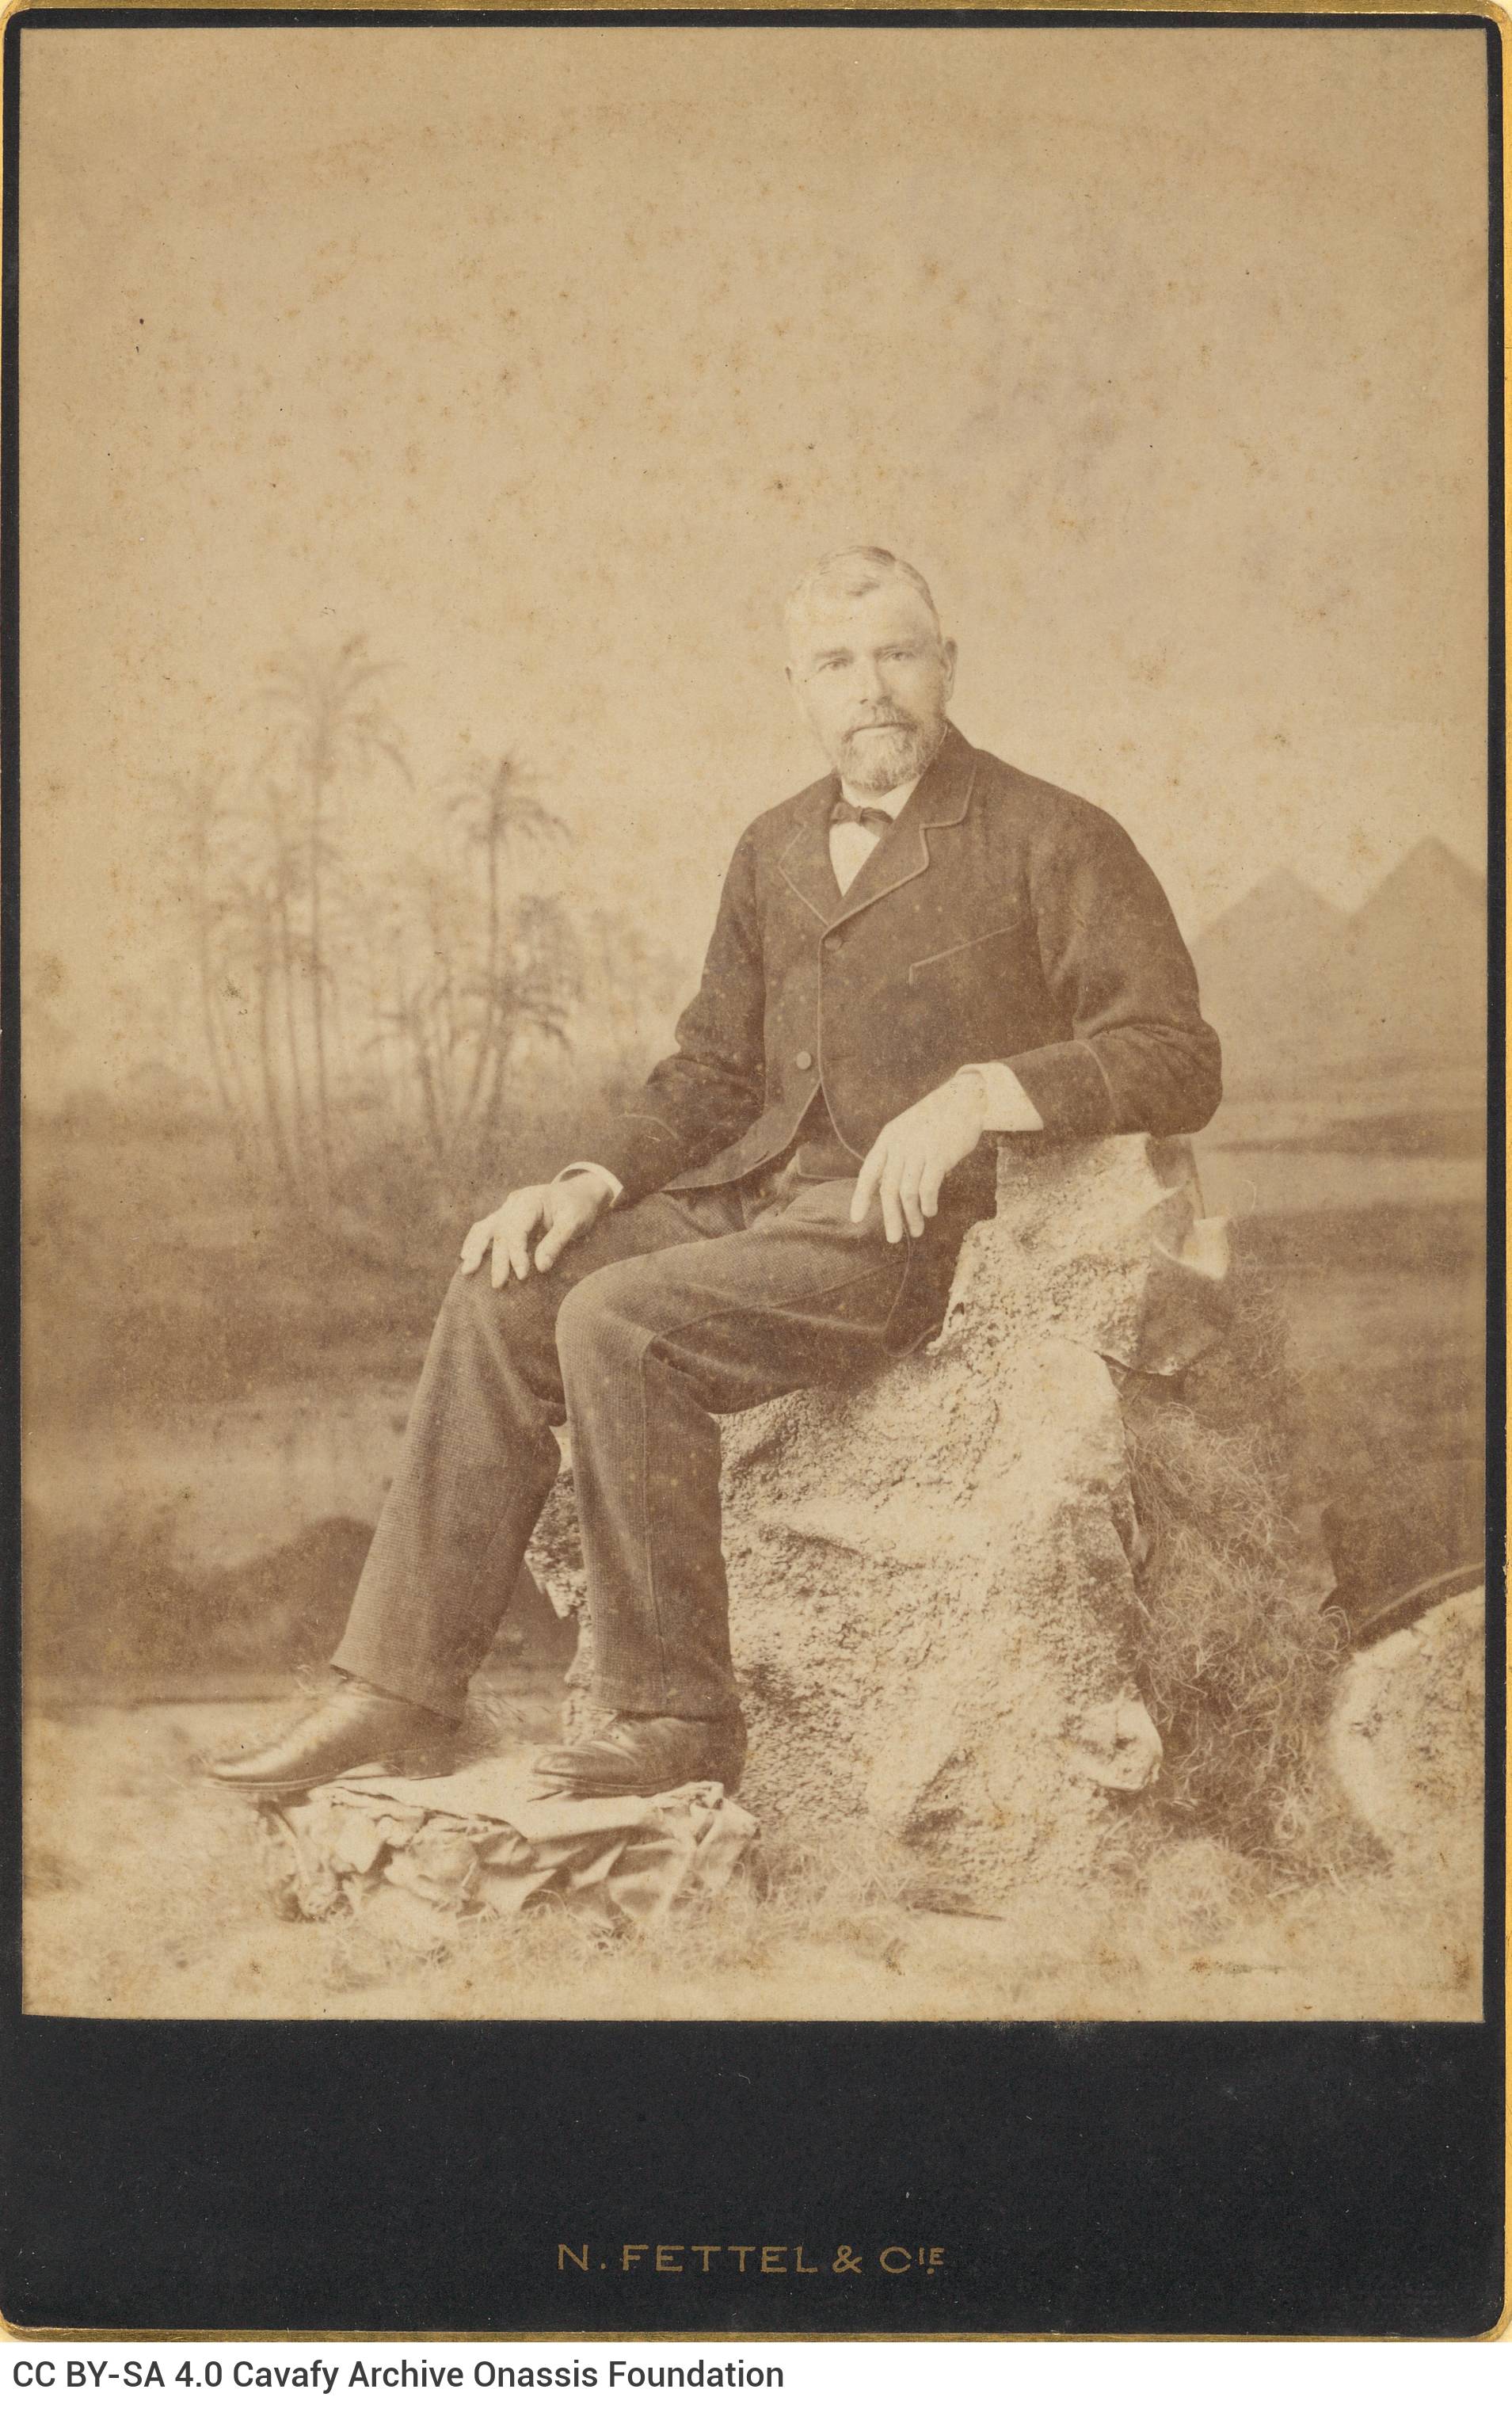 Photograph of a man in a suit and sitting on a rock, from the photo shop of N. Fettel & Cie of Alexandria. The photo shop's n